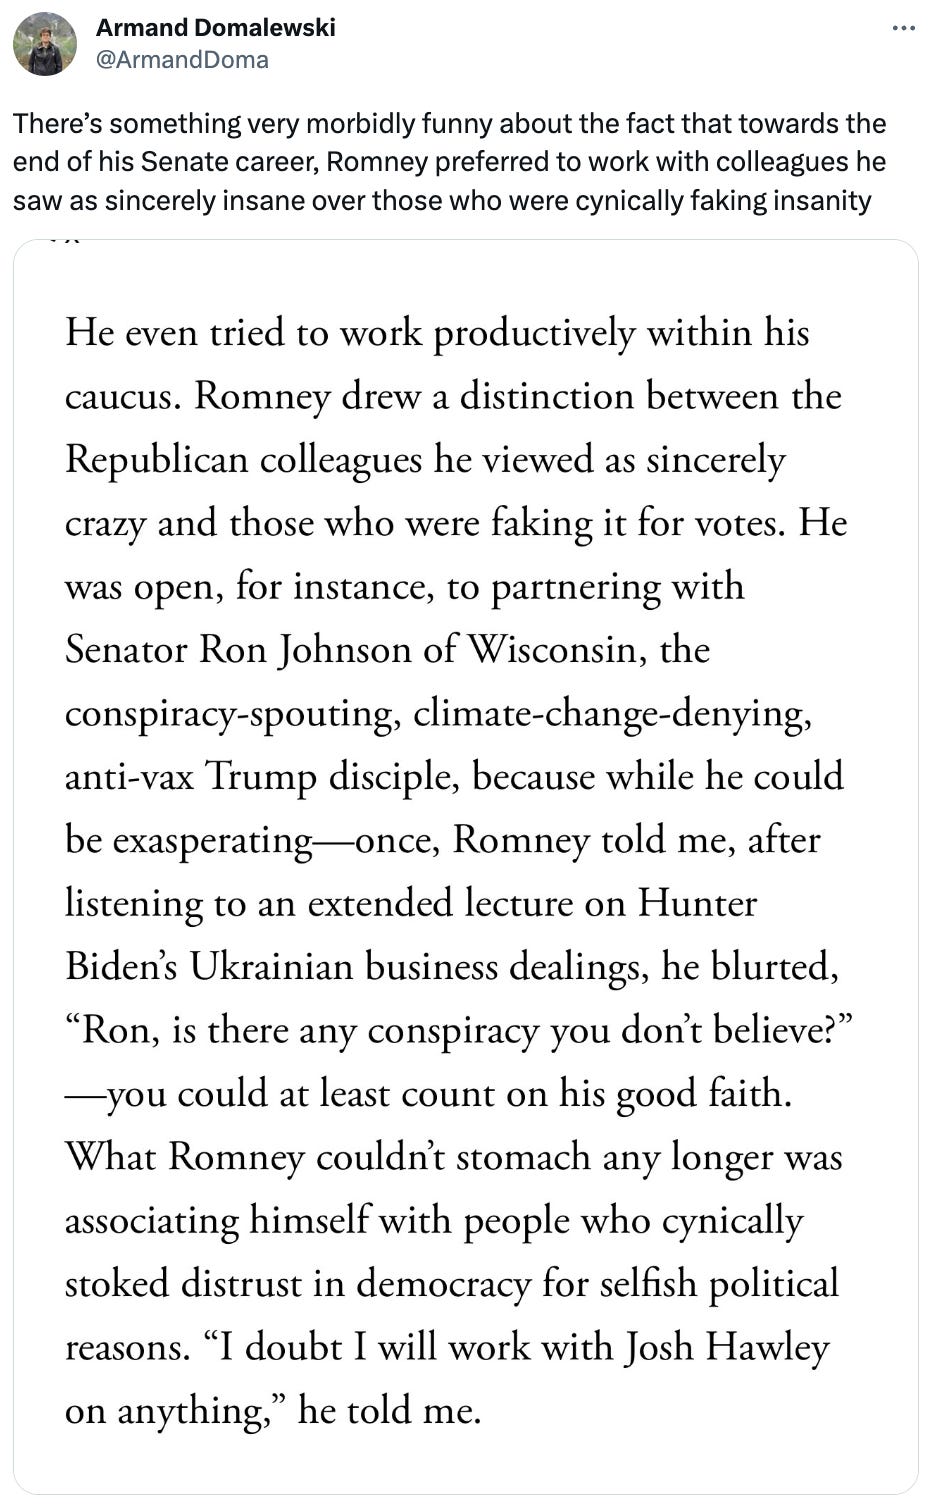  See new posts Conversation Armand Domalewski @ArmandDoma There’s something very morbidly funny about the fact that towards the end of his Senate career, Romney preferred to work with colleagues he saw as sincerely insane over those who were cynically faking insanity